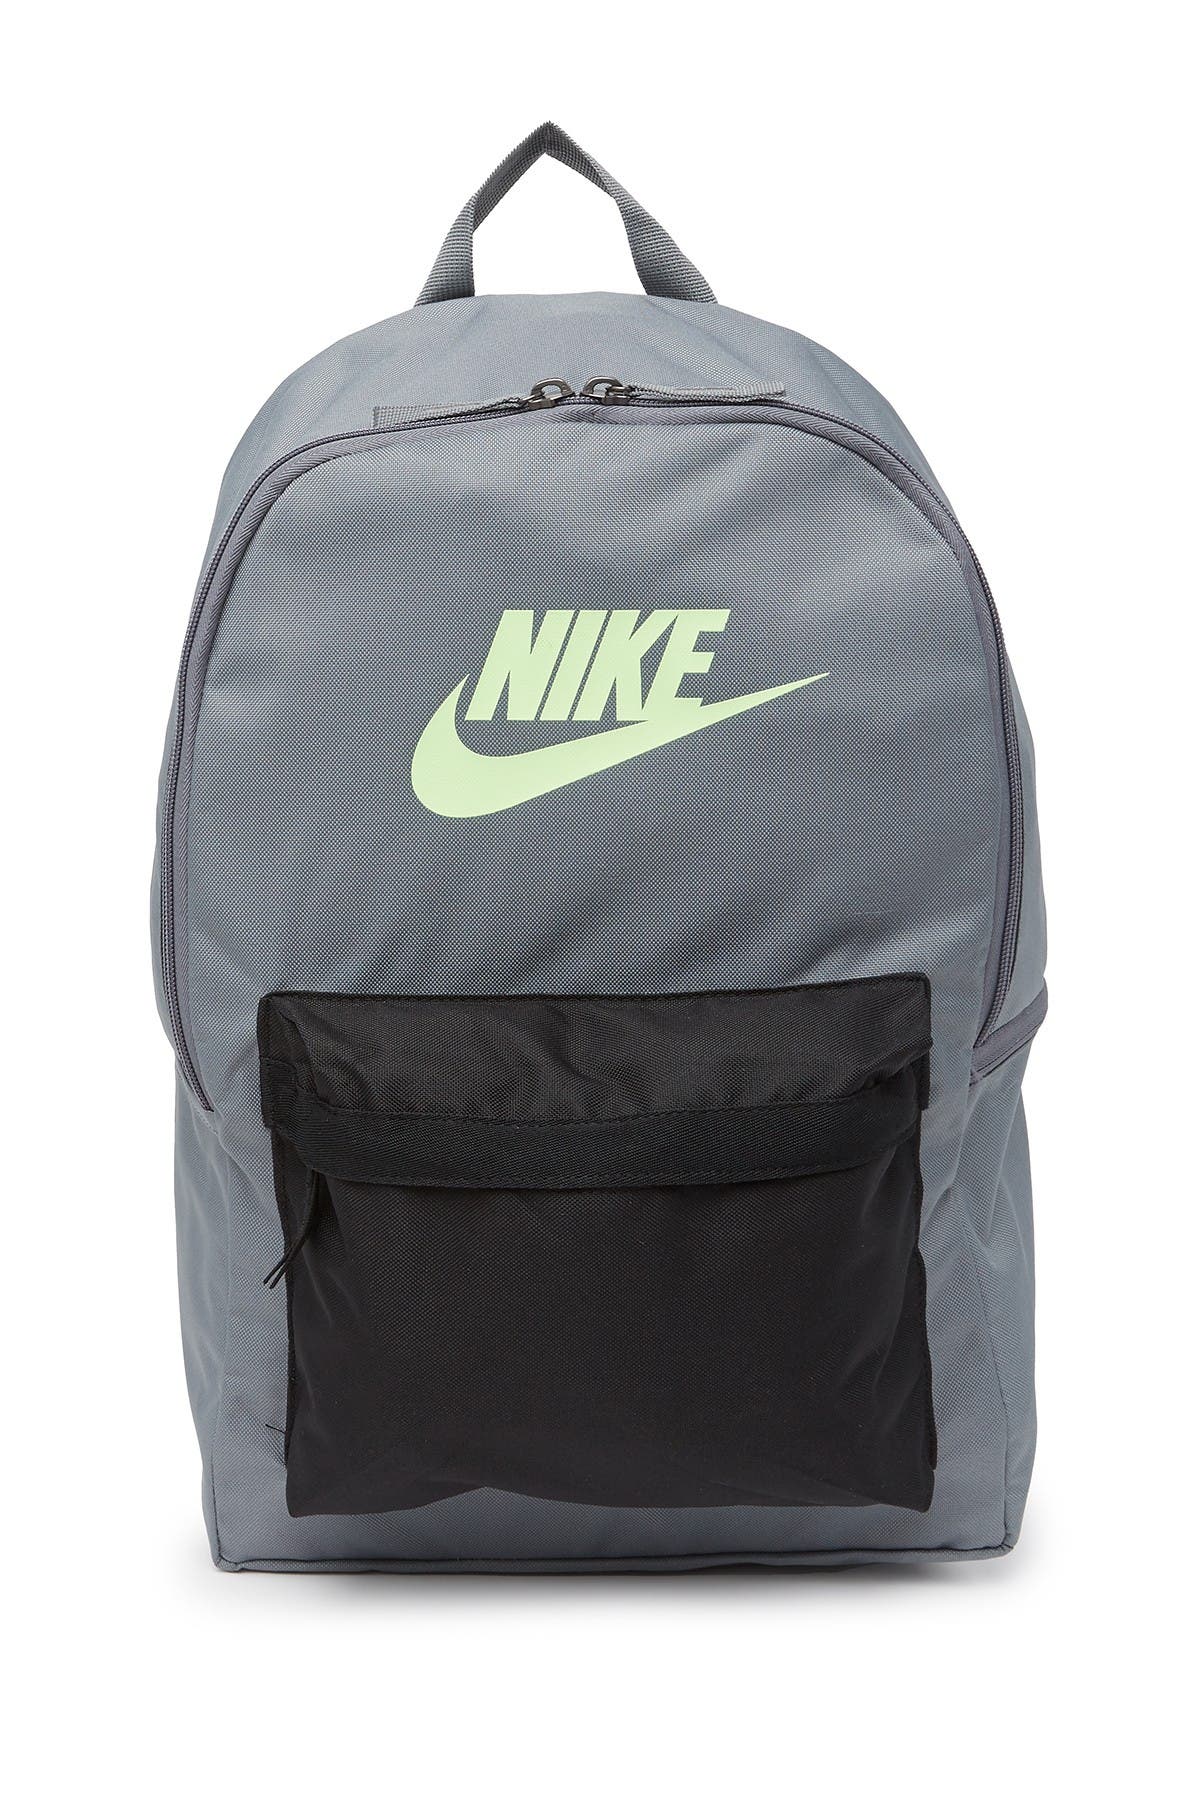 nike air heritage 2. graphic backpack